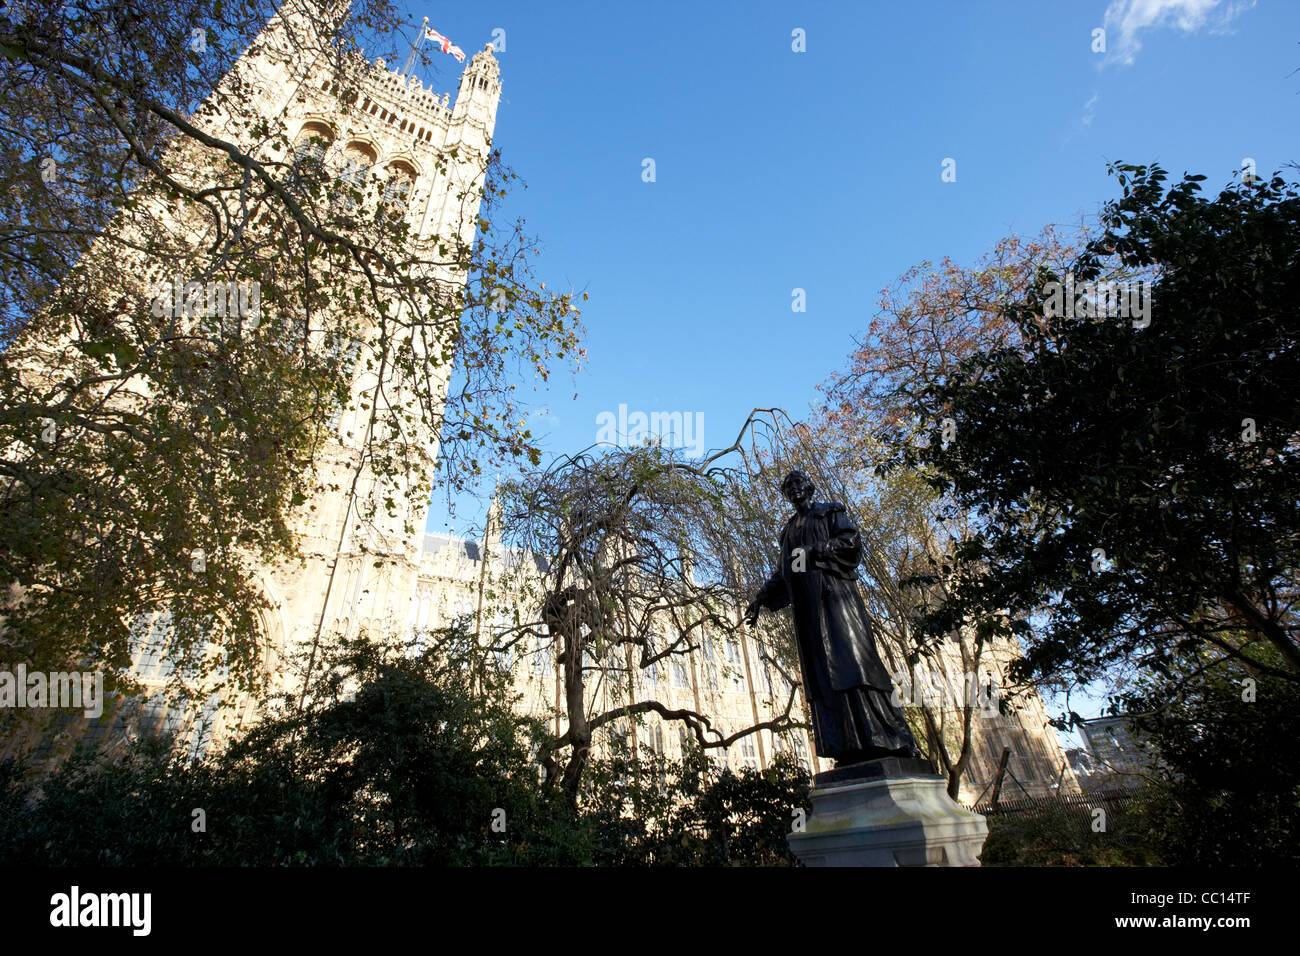 emmeline pankhurst memorial in victoria tower gardens at the palace of westminster houses of parliament buildings London England Stock Photo